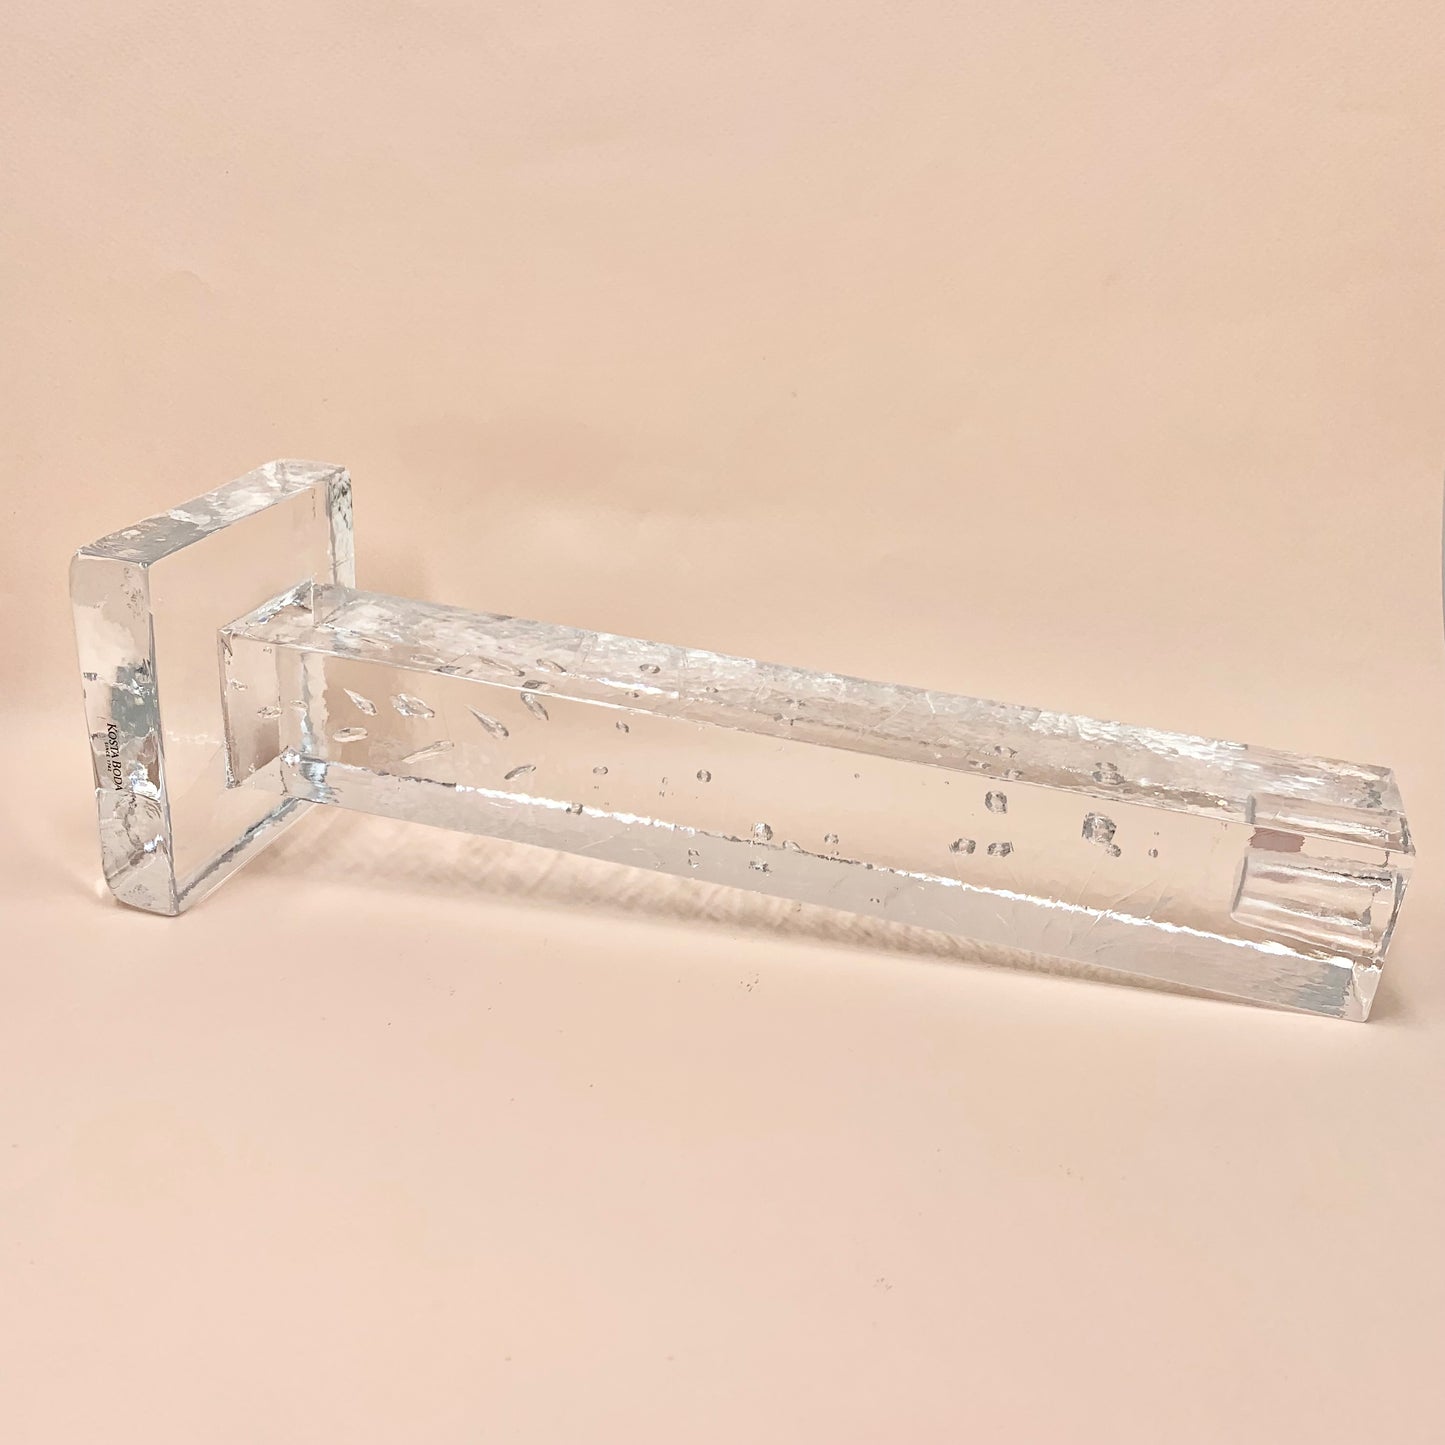 Extremely rare vintage Kosta Boda hand blown clear glass candle holder with controlled bubbles